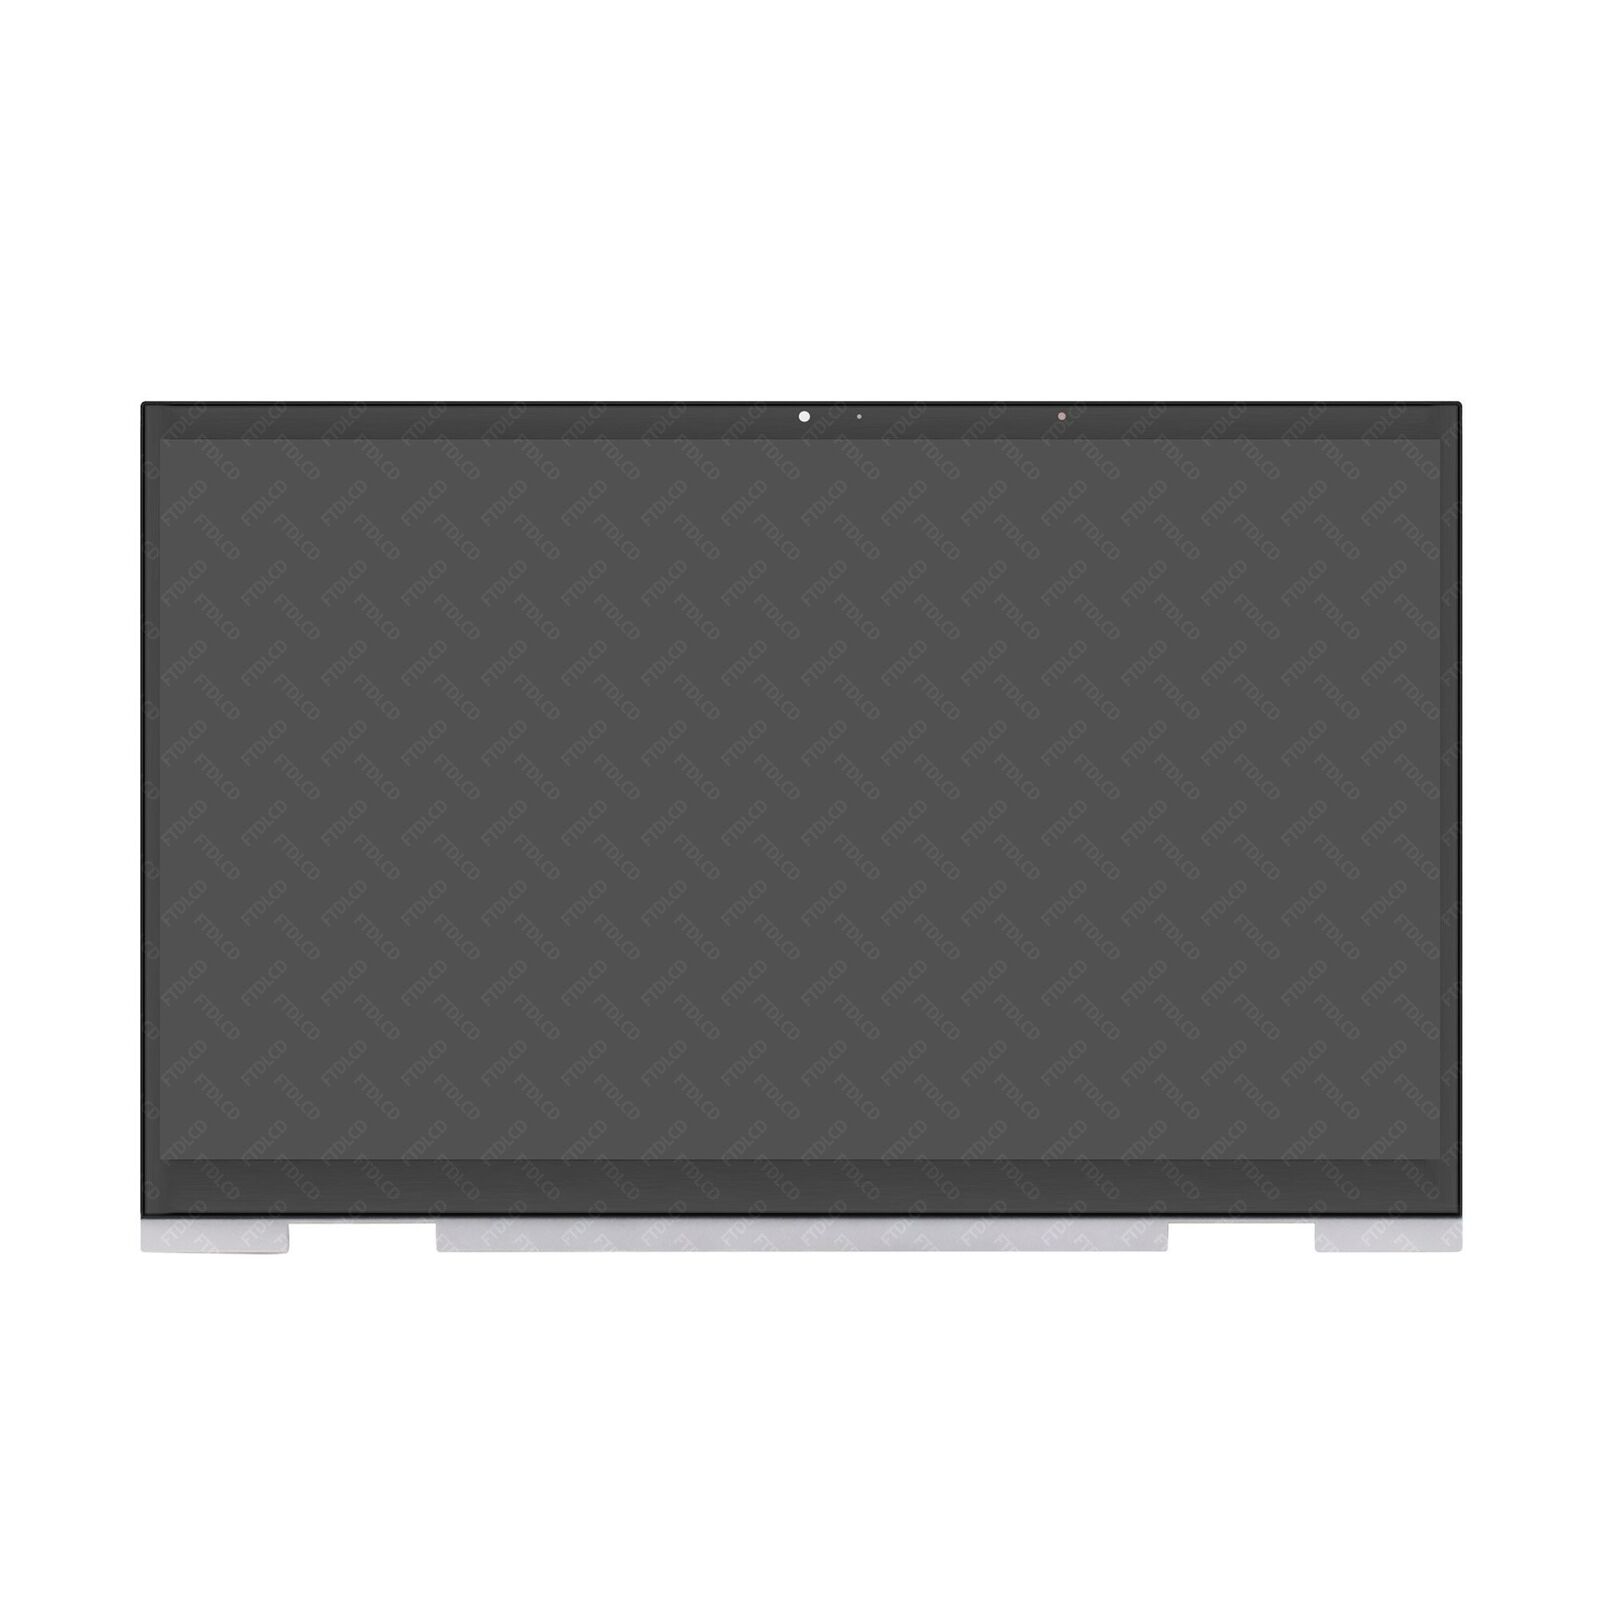 M45452-001 FHD LCD Touch Screen Digitizer Assembly for HP ENVY X360 15M-ES1023DX